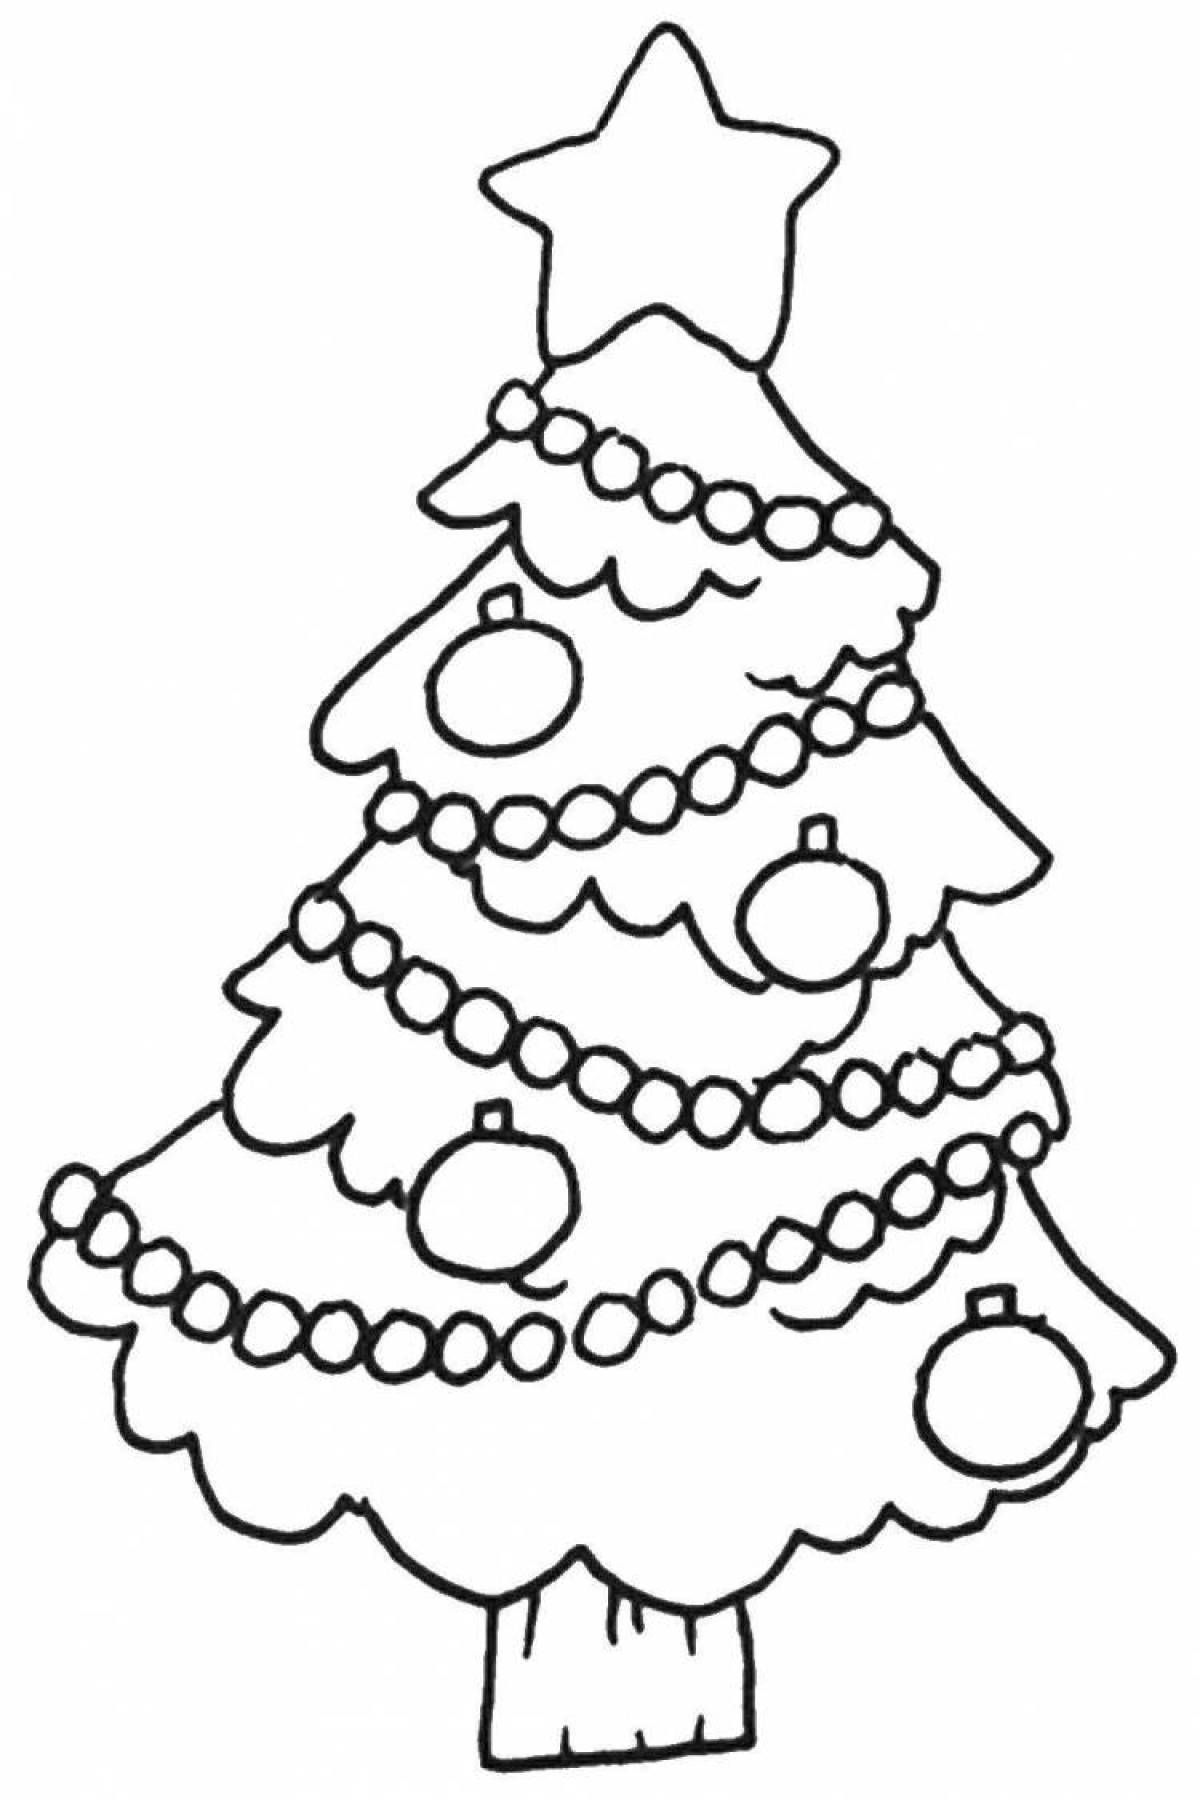 Glittering tree coloring page for 3-4 year olds